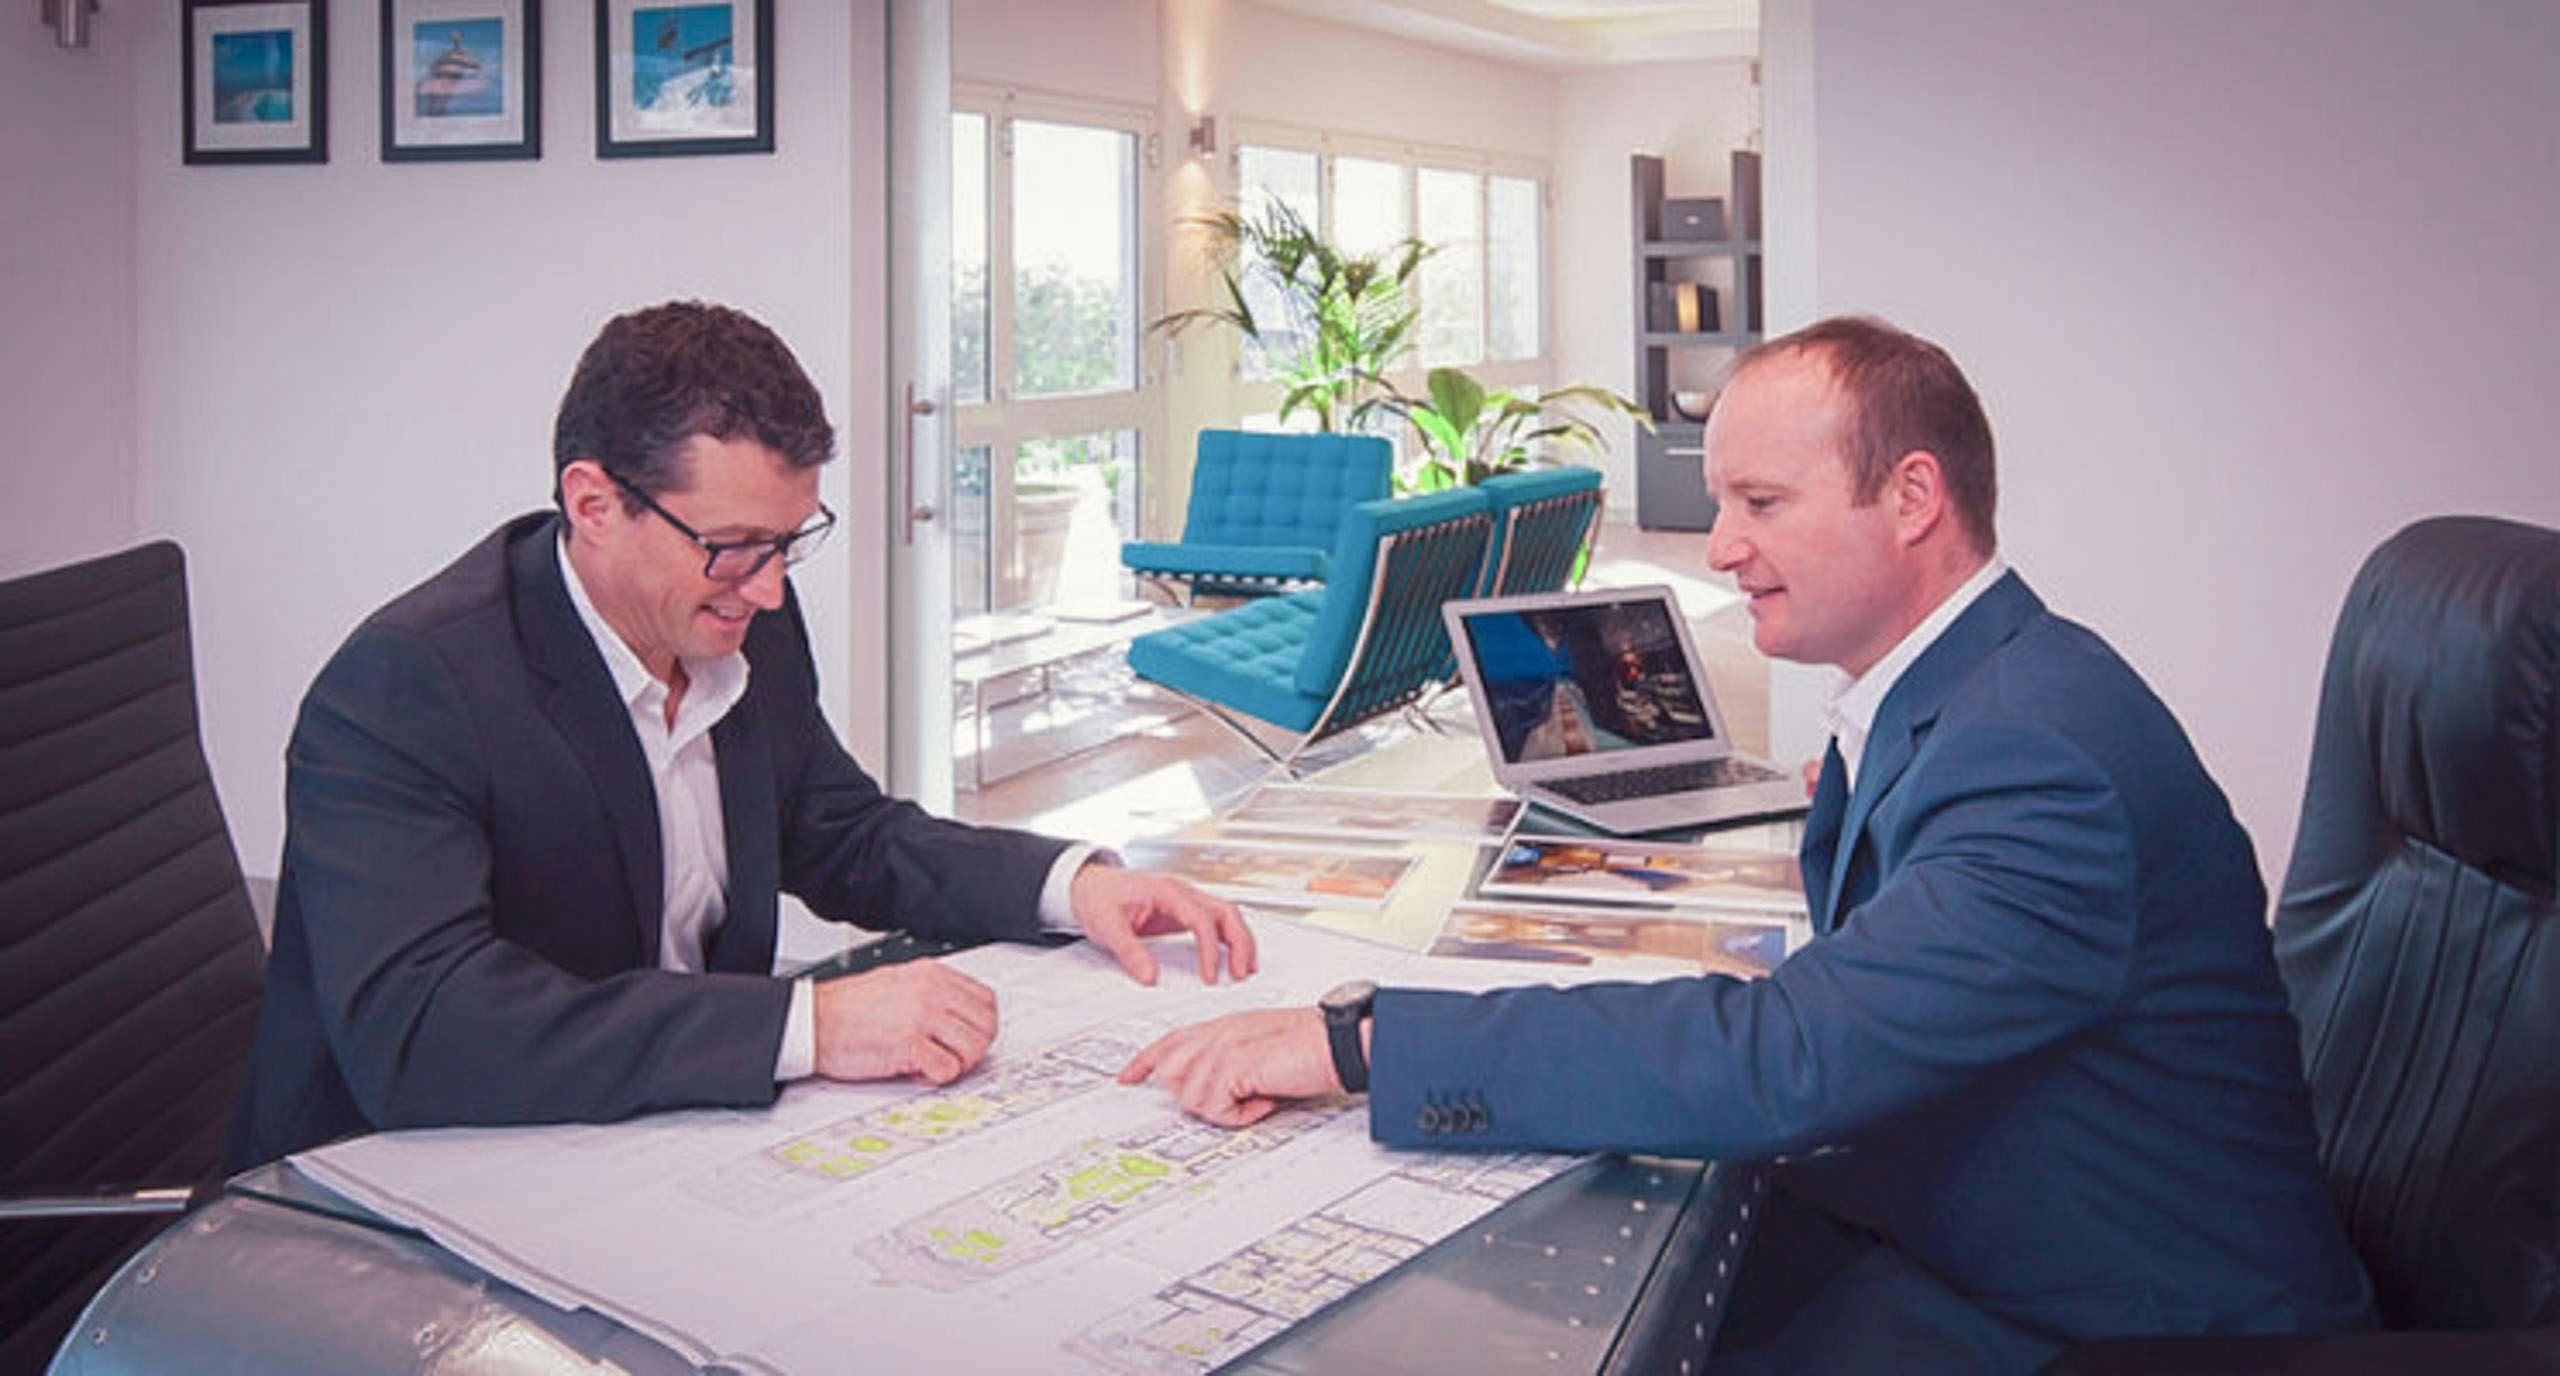 Yacht manager and client looking at yacht designs on desk